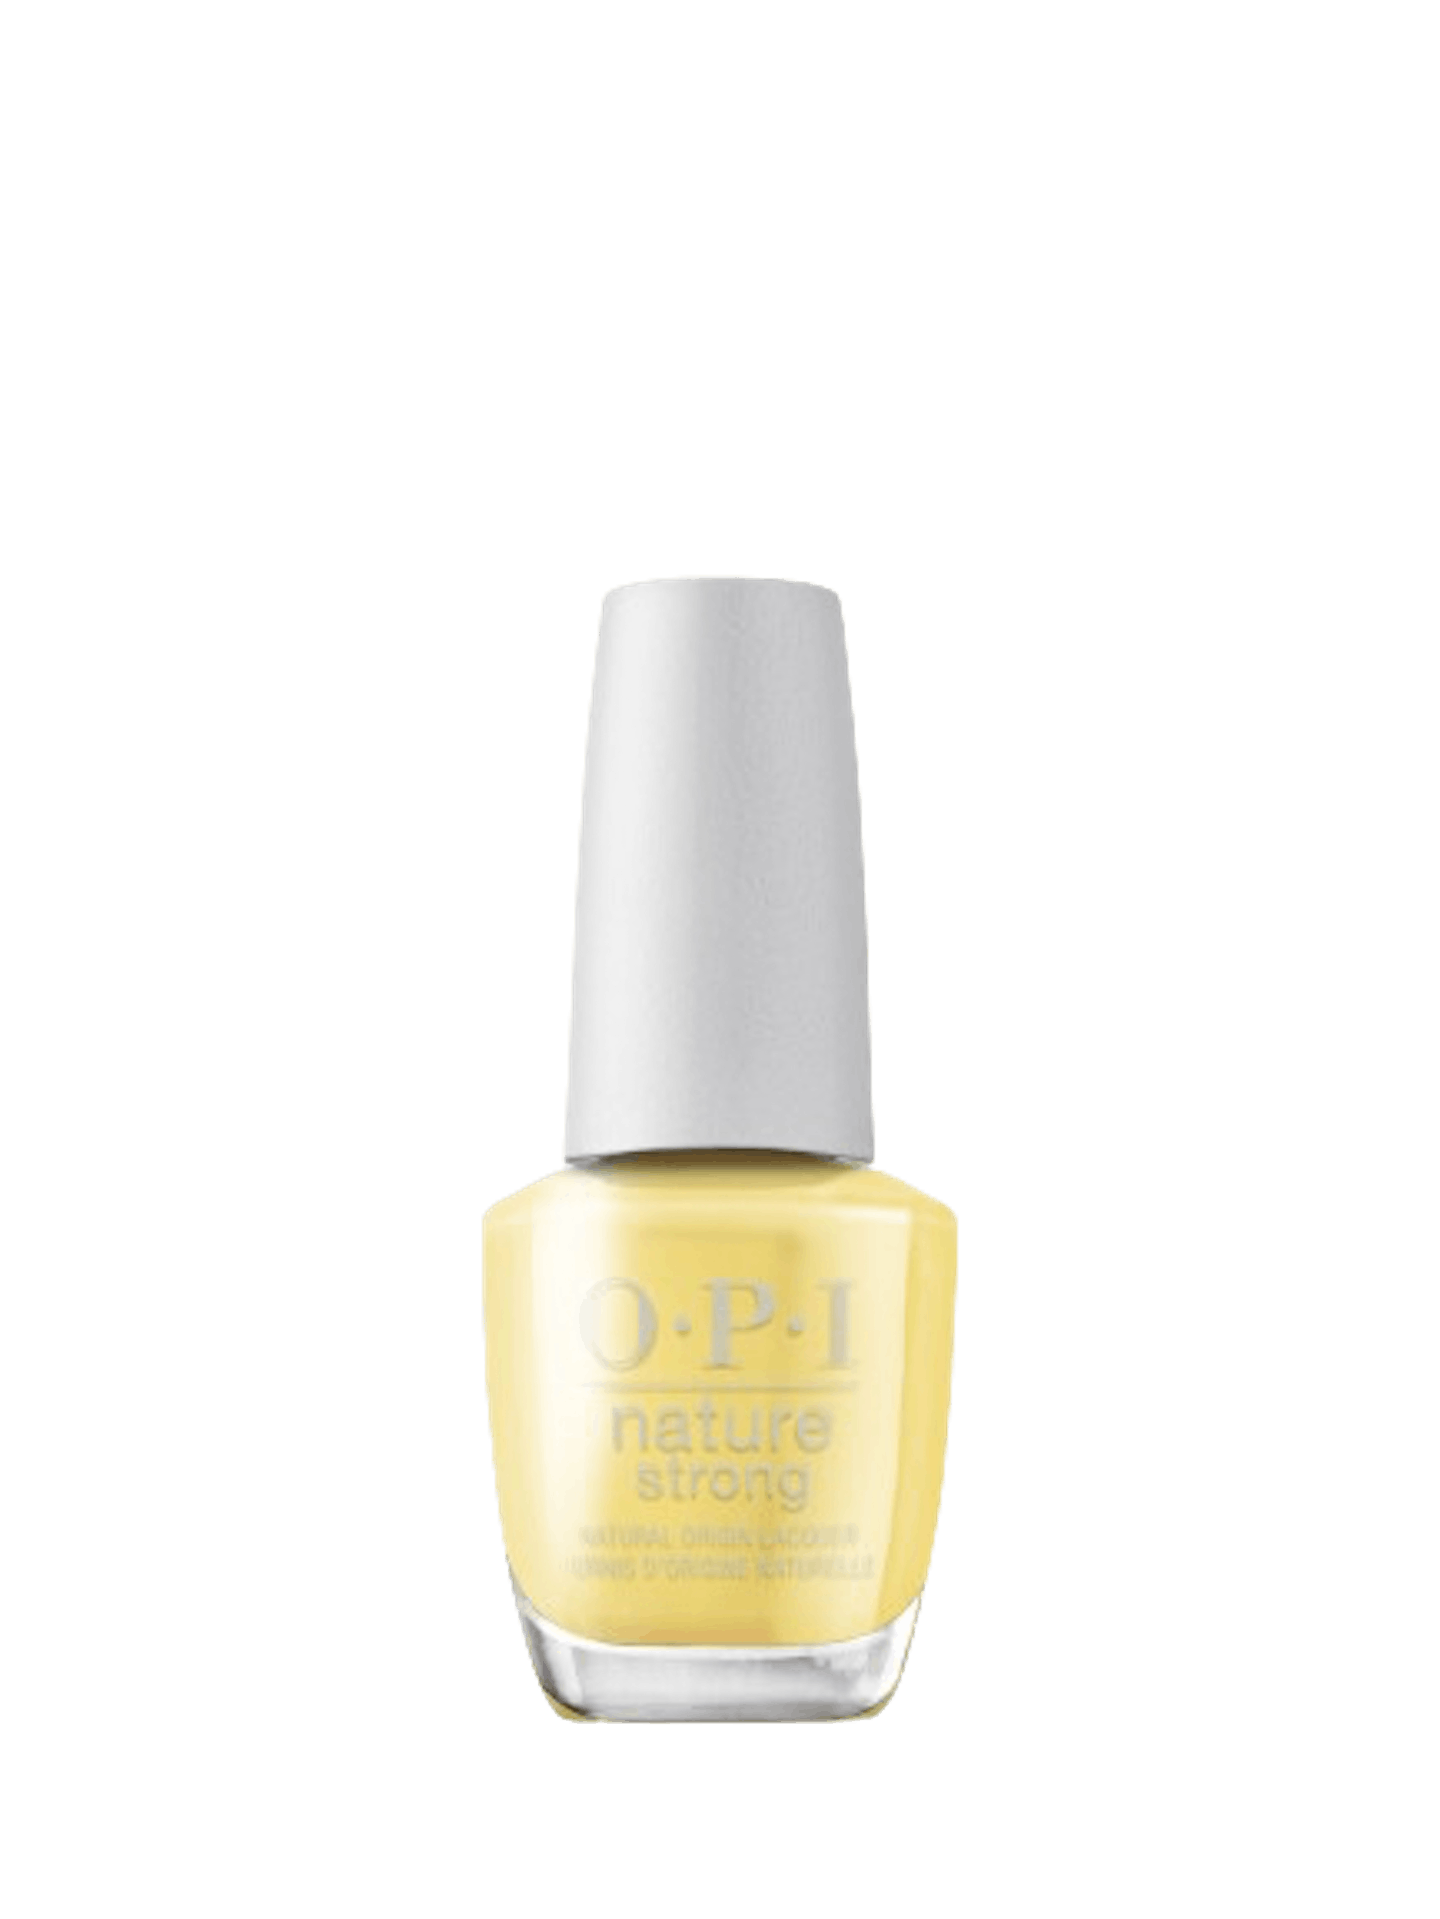 OPI Nature Strong Nail Lacquer in Make My Daisy